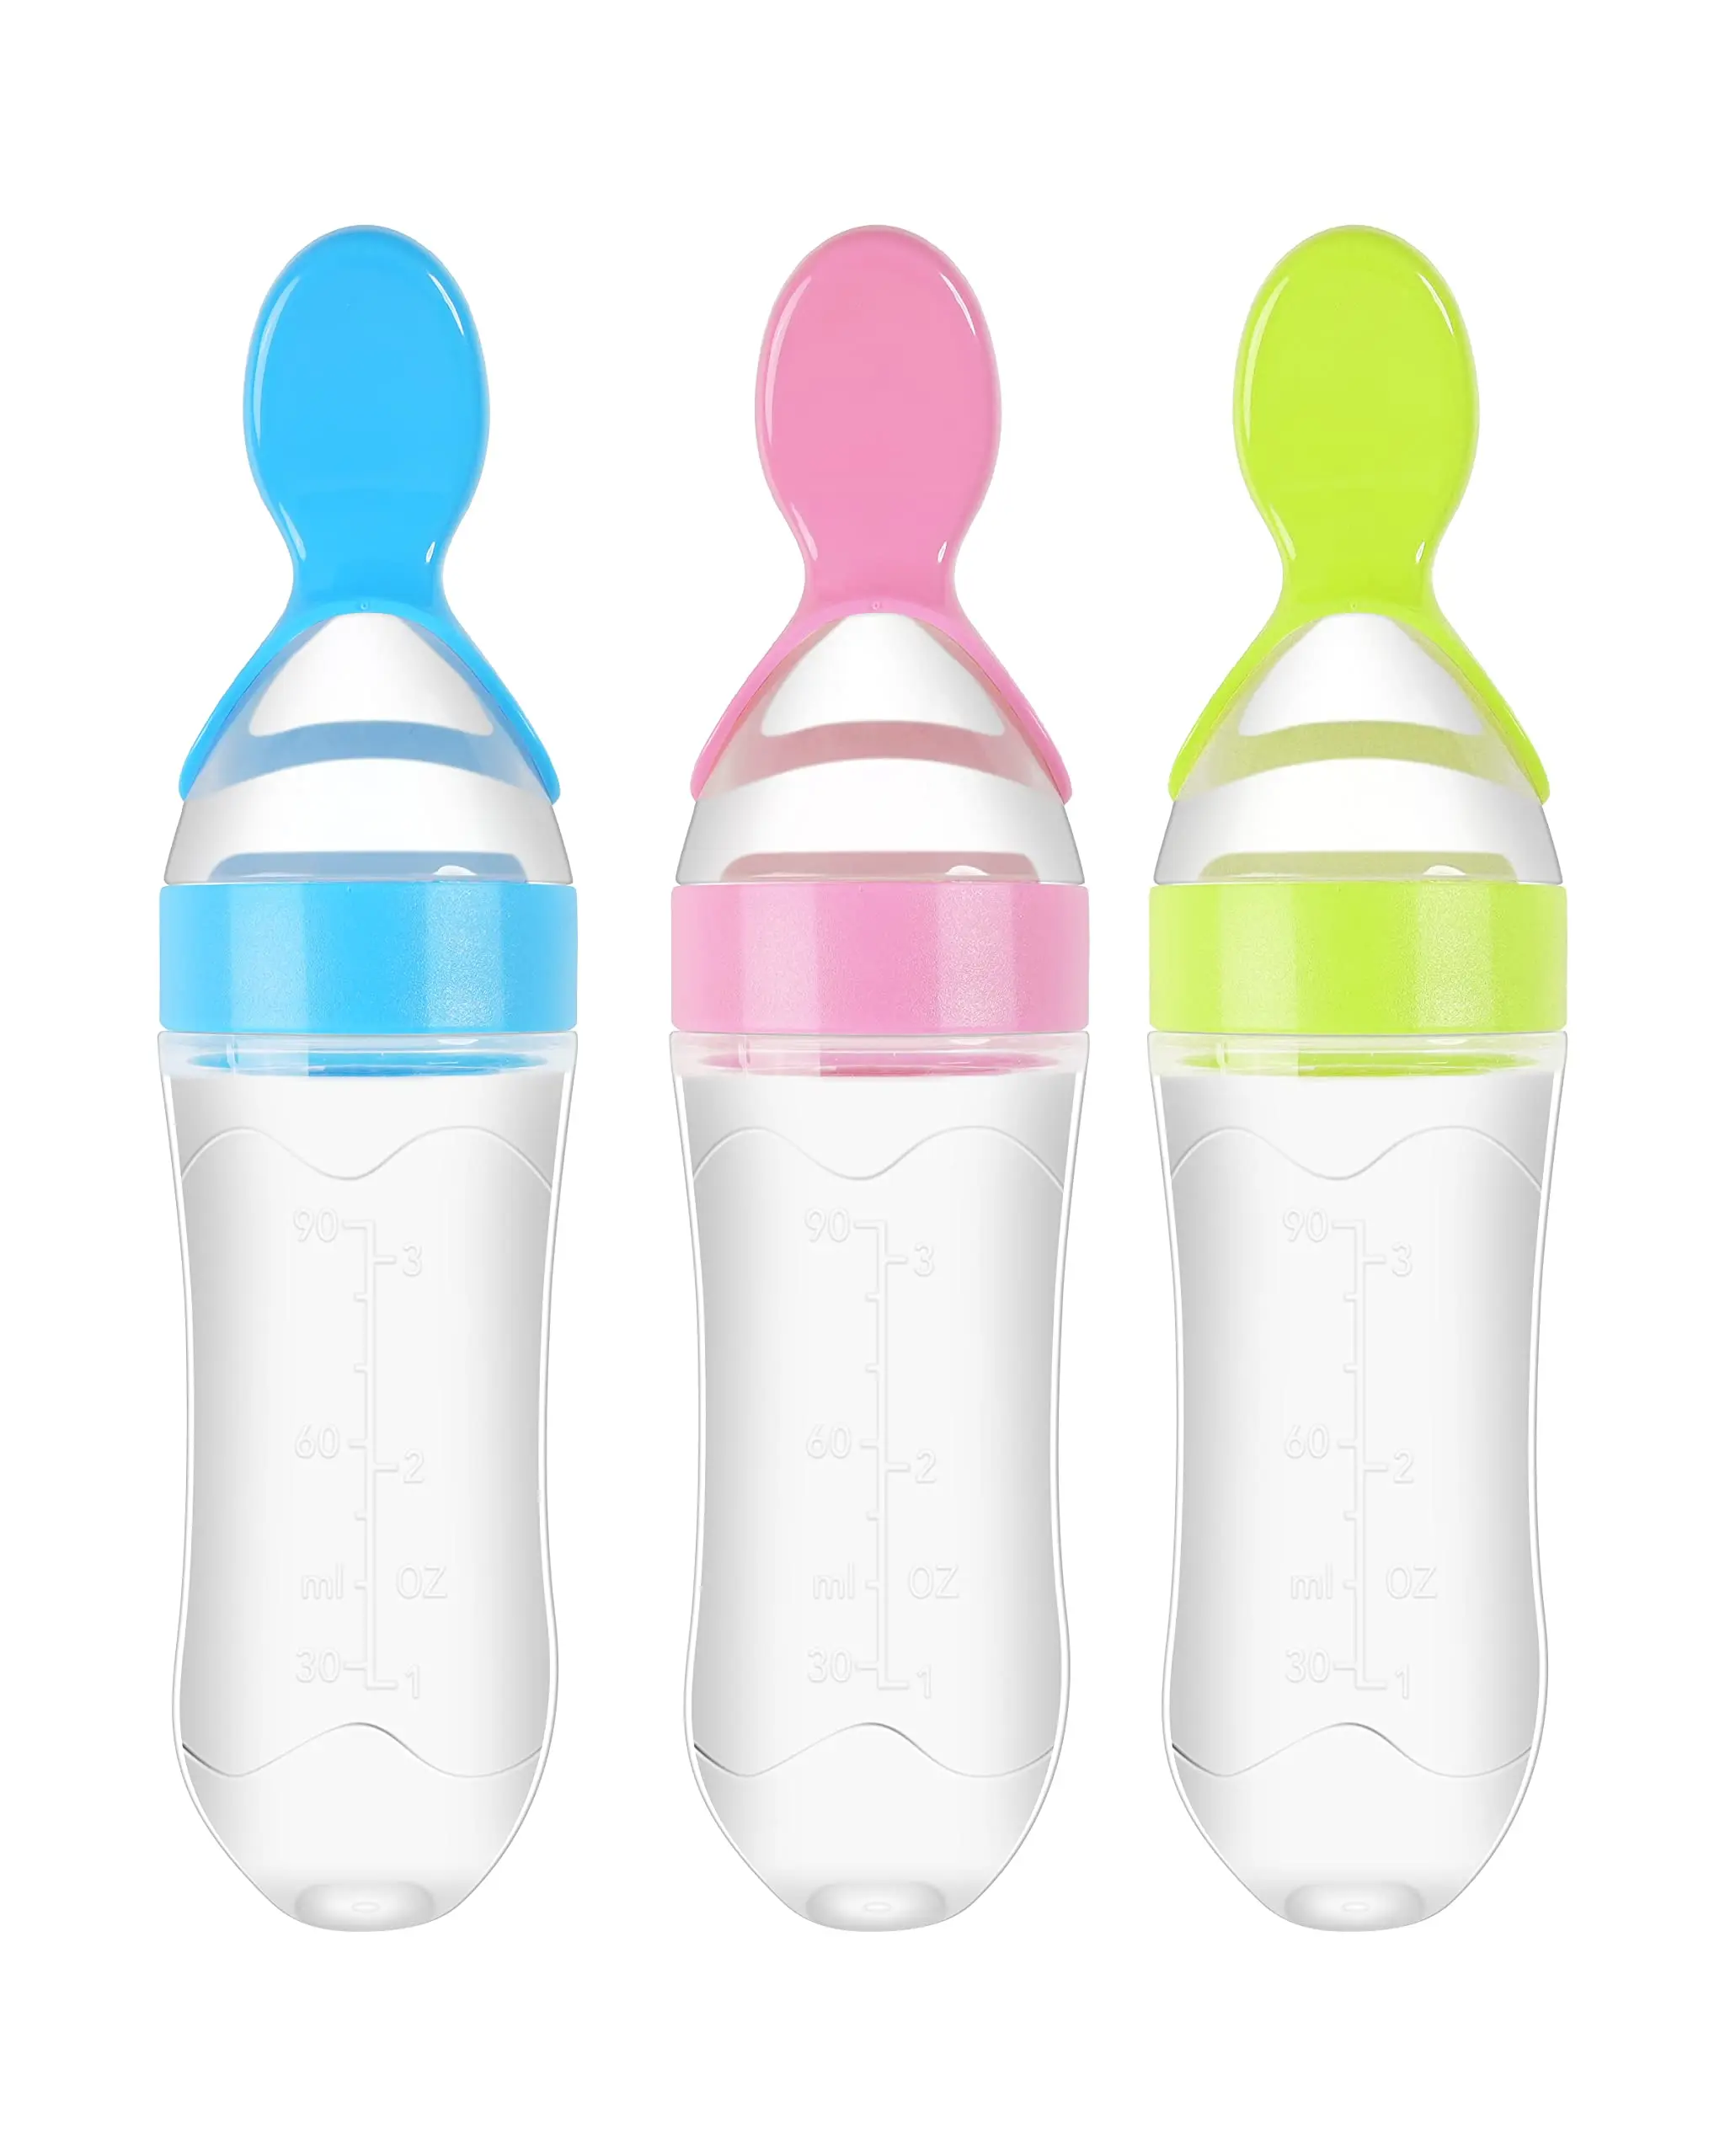 Silicone Squeeze Baby Feeding Bottle Food Rice Cereal Feeder with Spoon for 0-12 Months Water Bottles for Infant Care